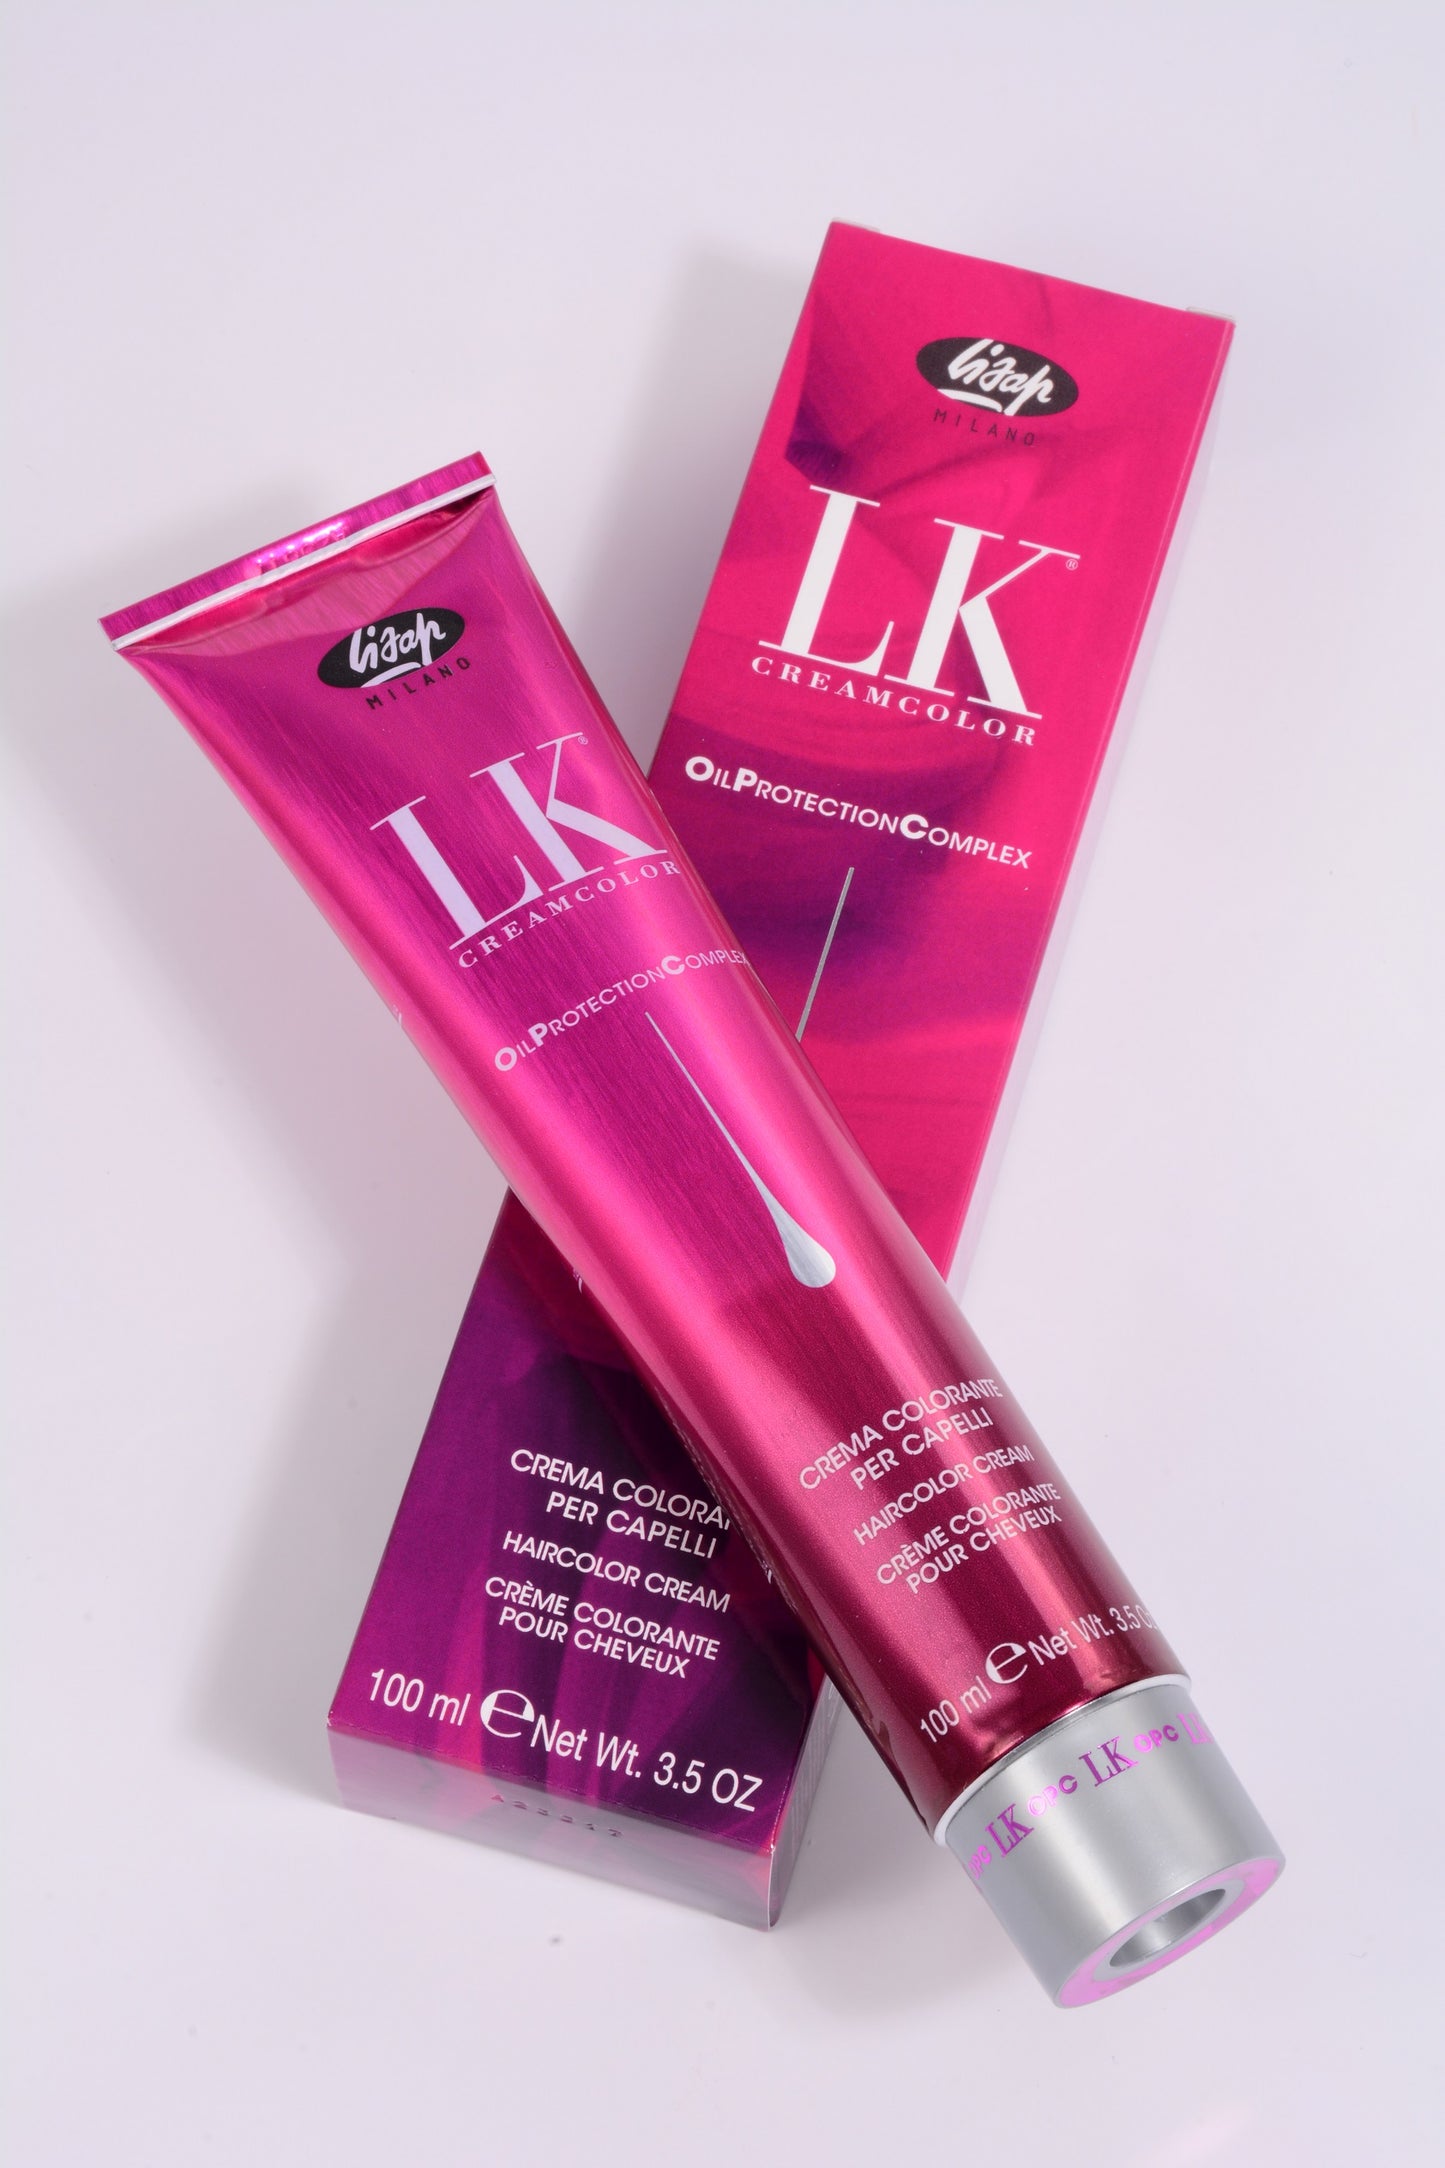 LK Creamcolor 8/78 Oil Protection Complex